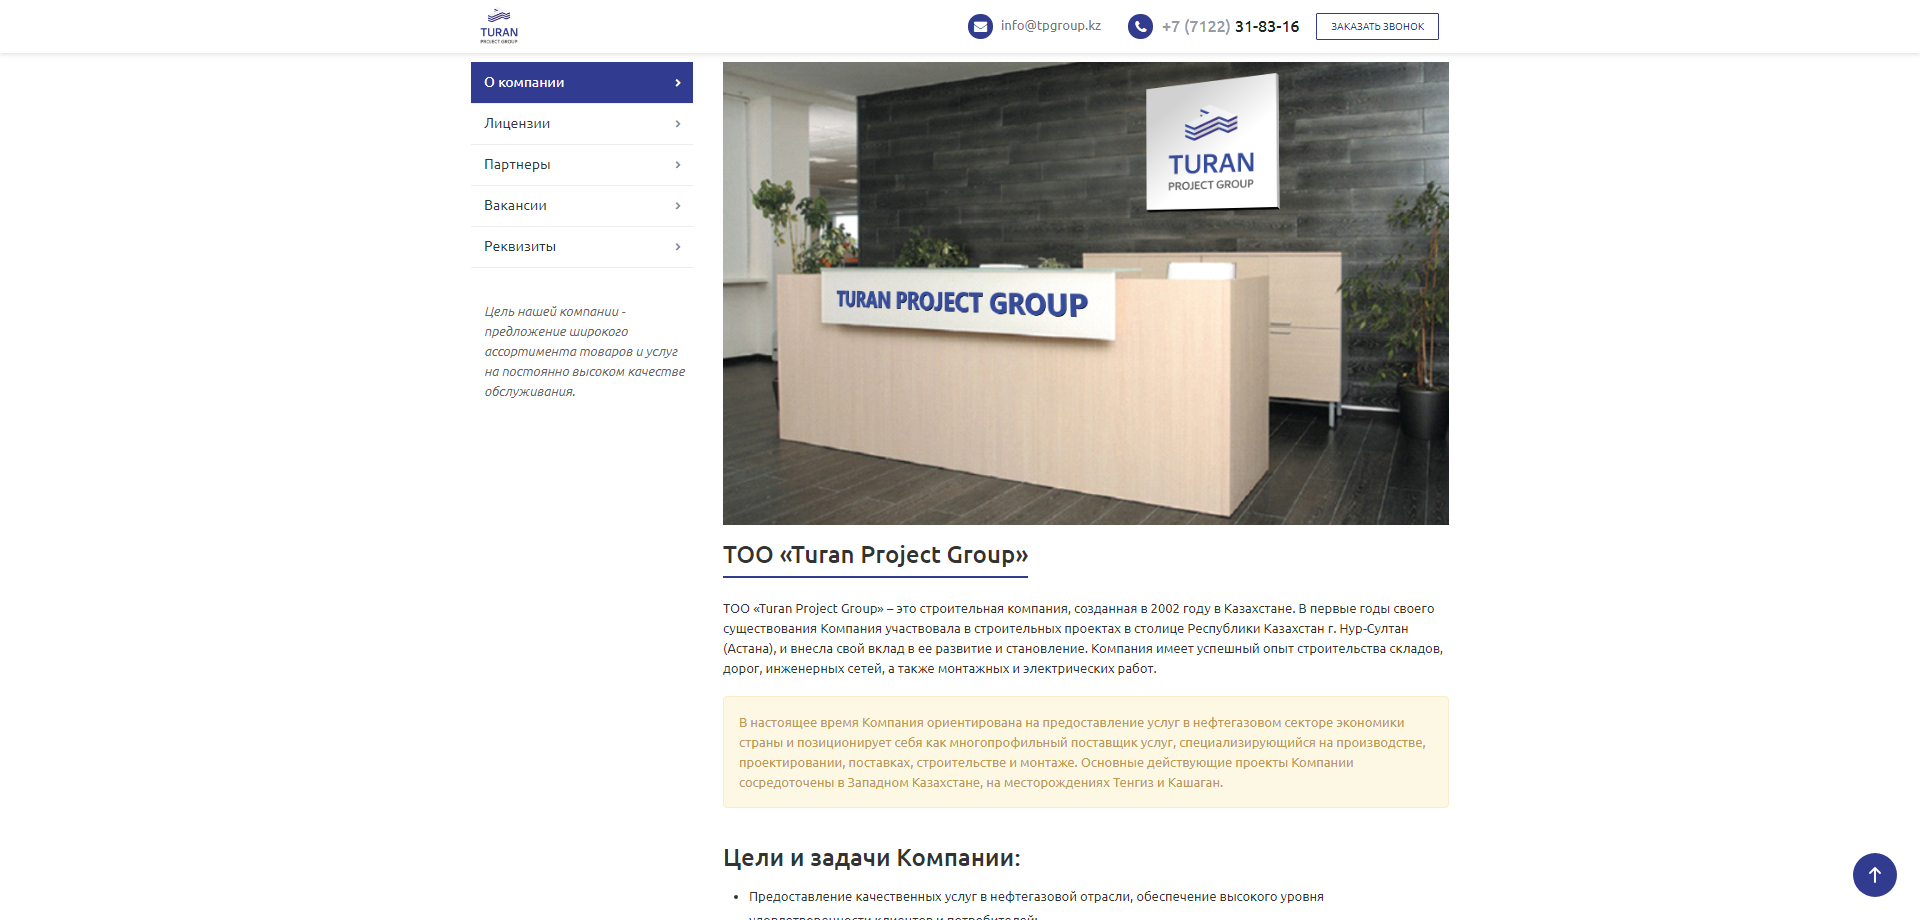 too "turan project group"